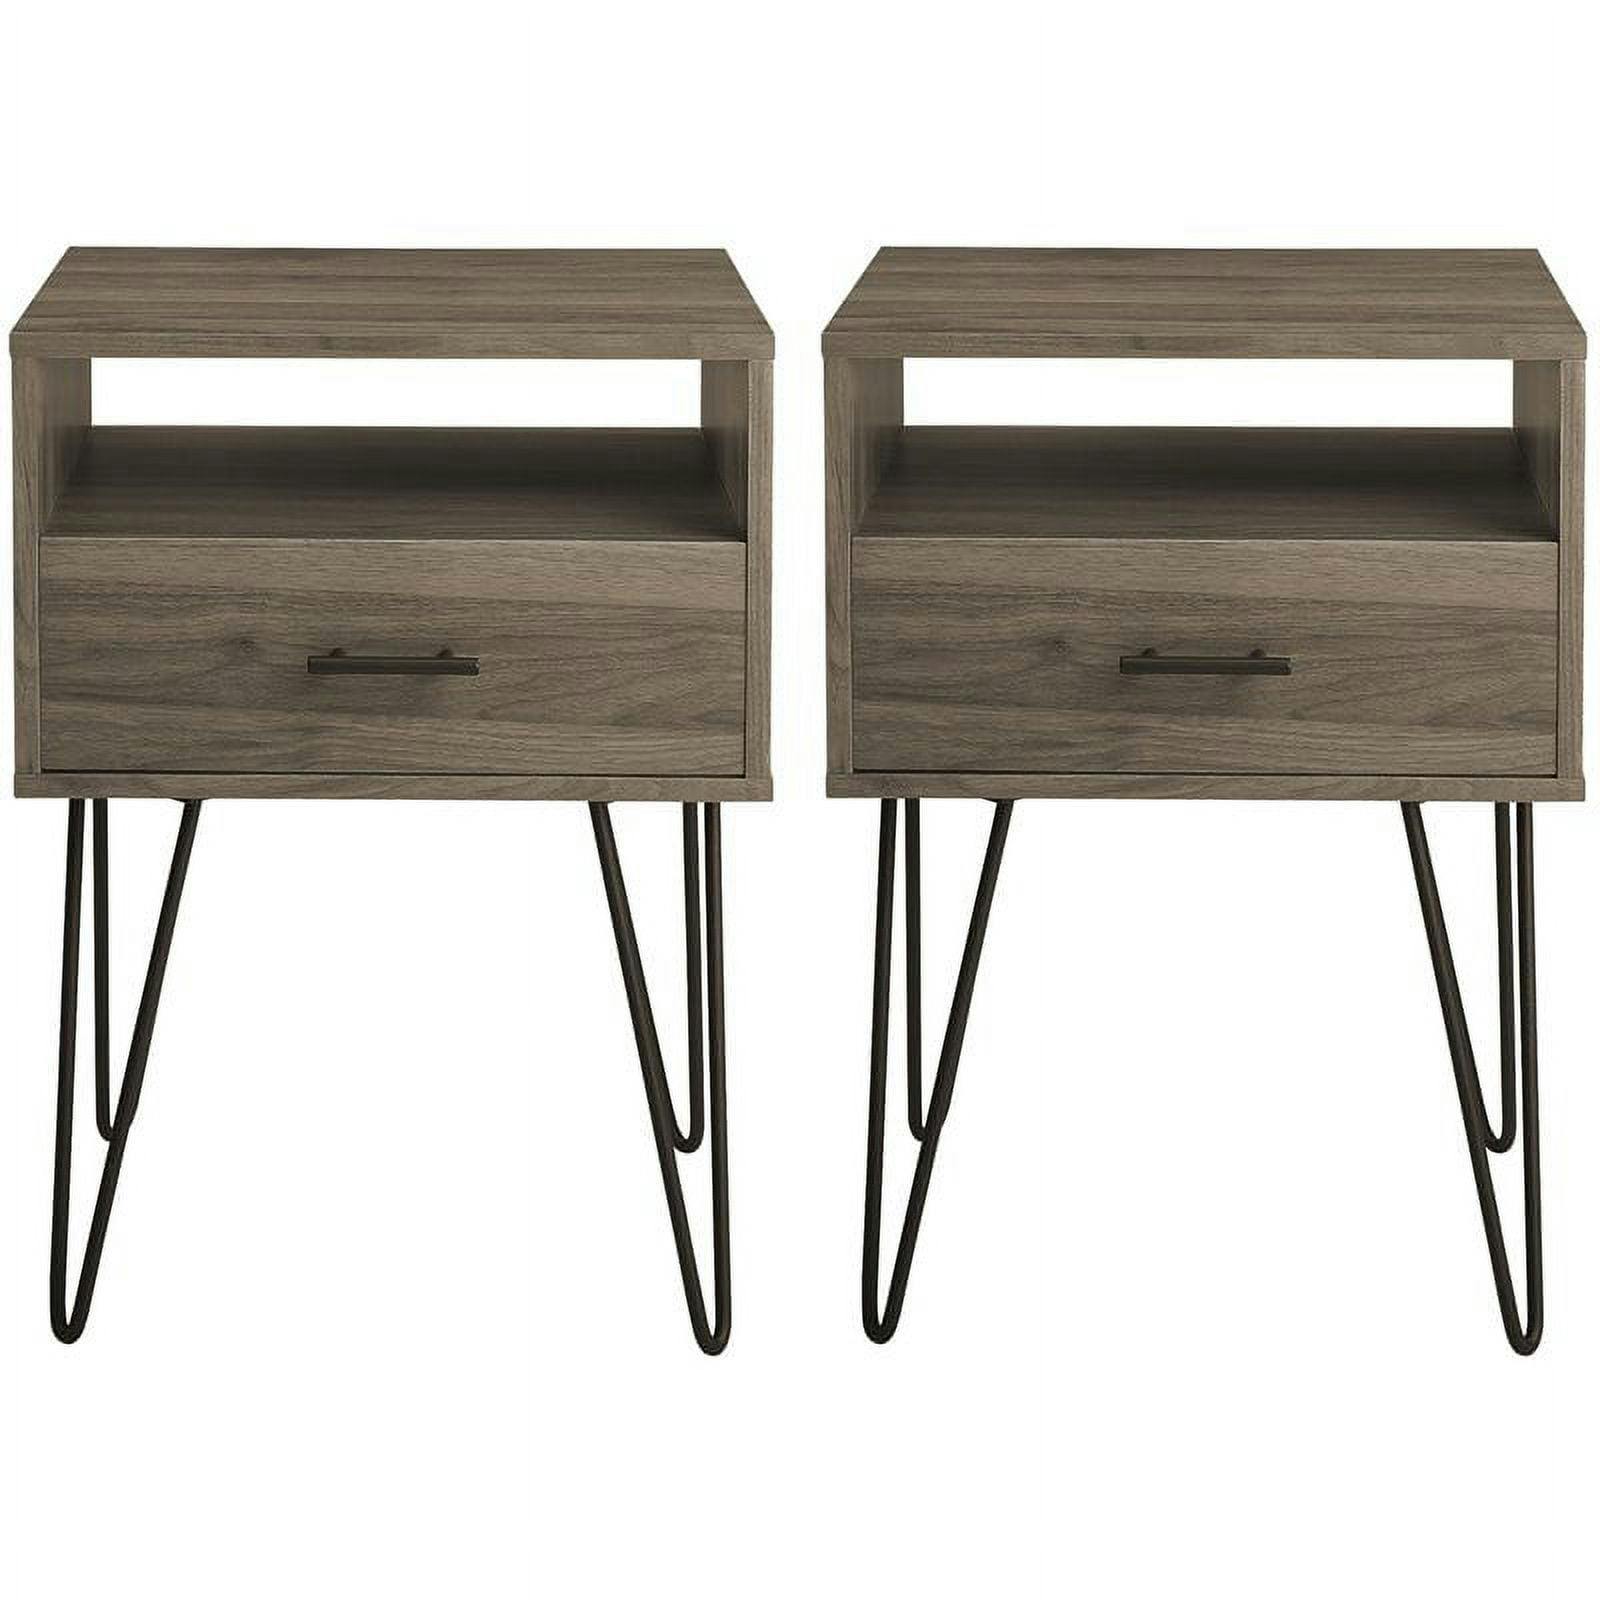 Slate Grey Alloy Steel & MDF Mid-Century Modern Side Table Set with Storage